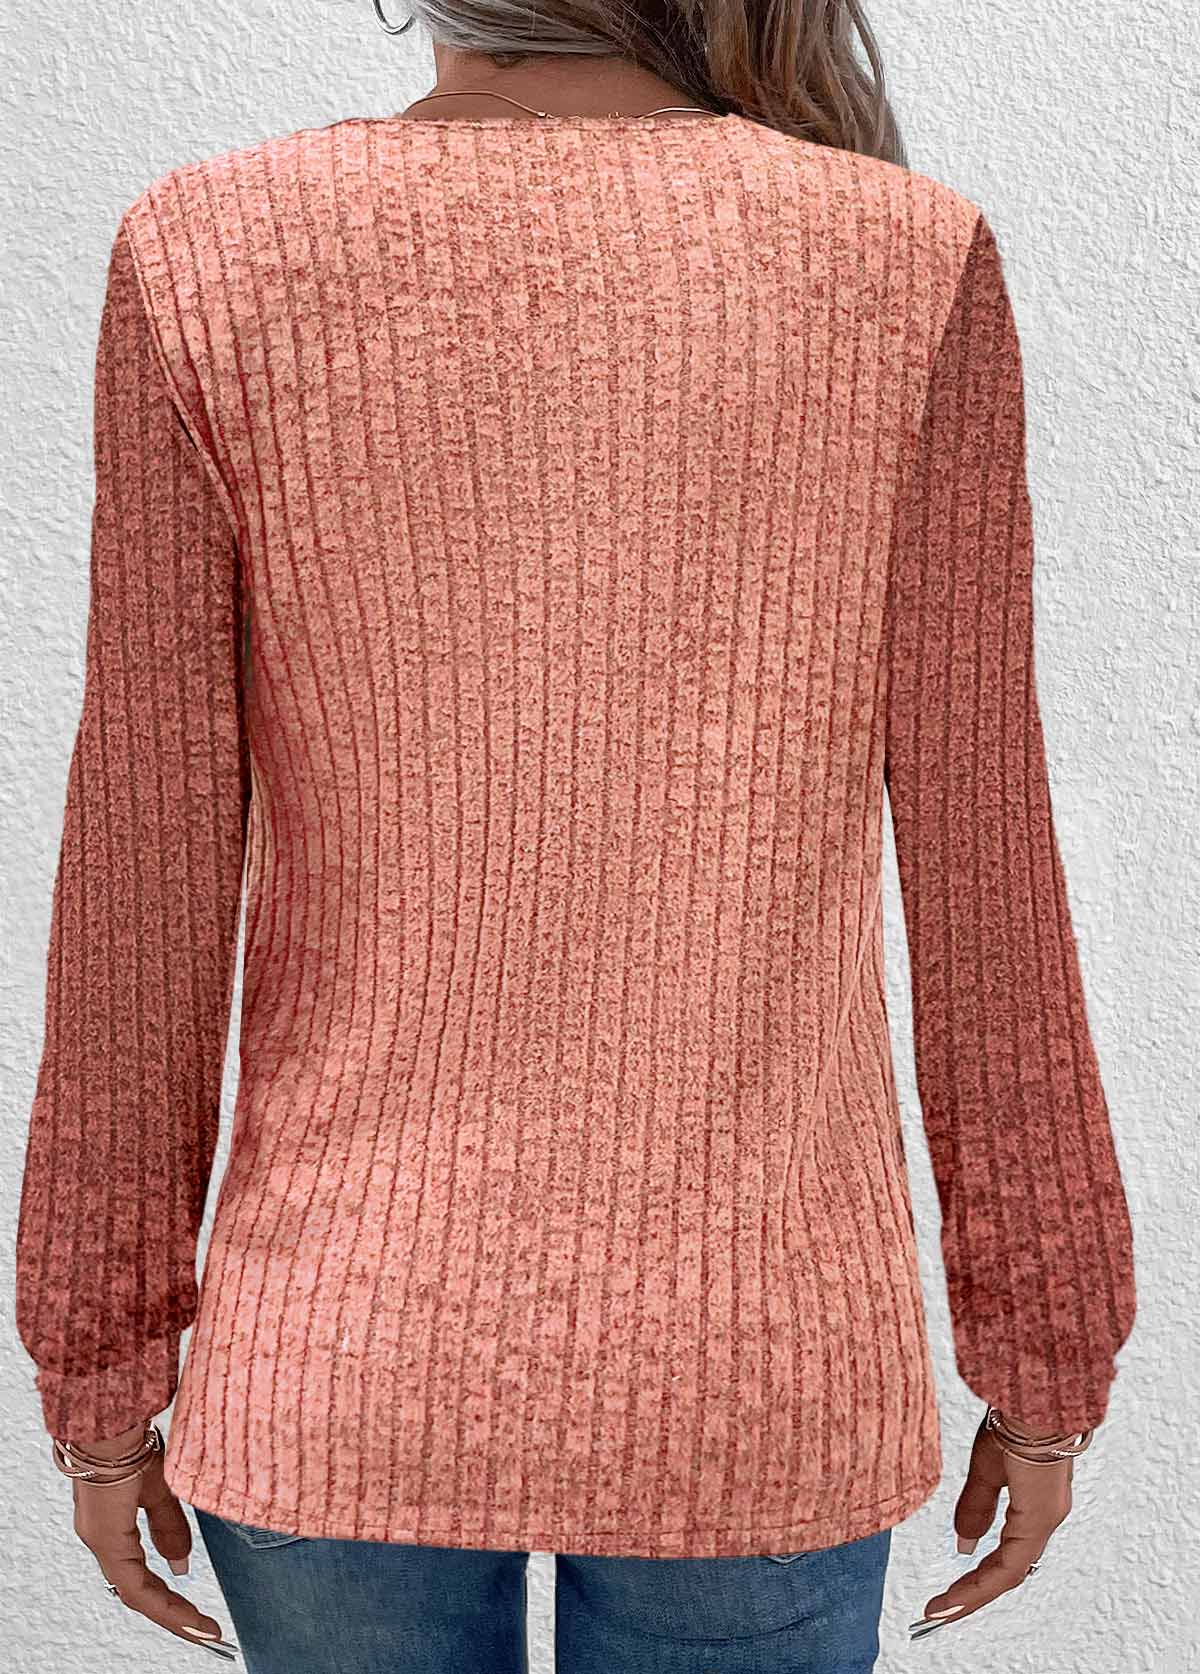 Ruched Dusty Pink Long Sleeve Round Neck Sweatshirt